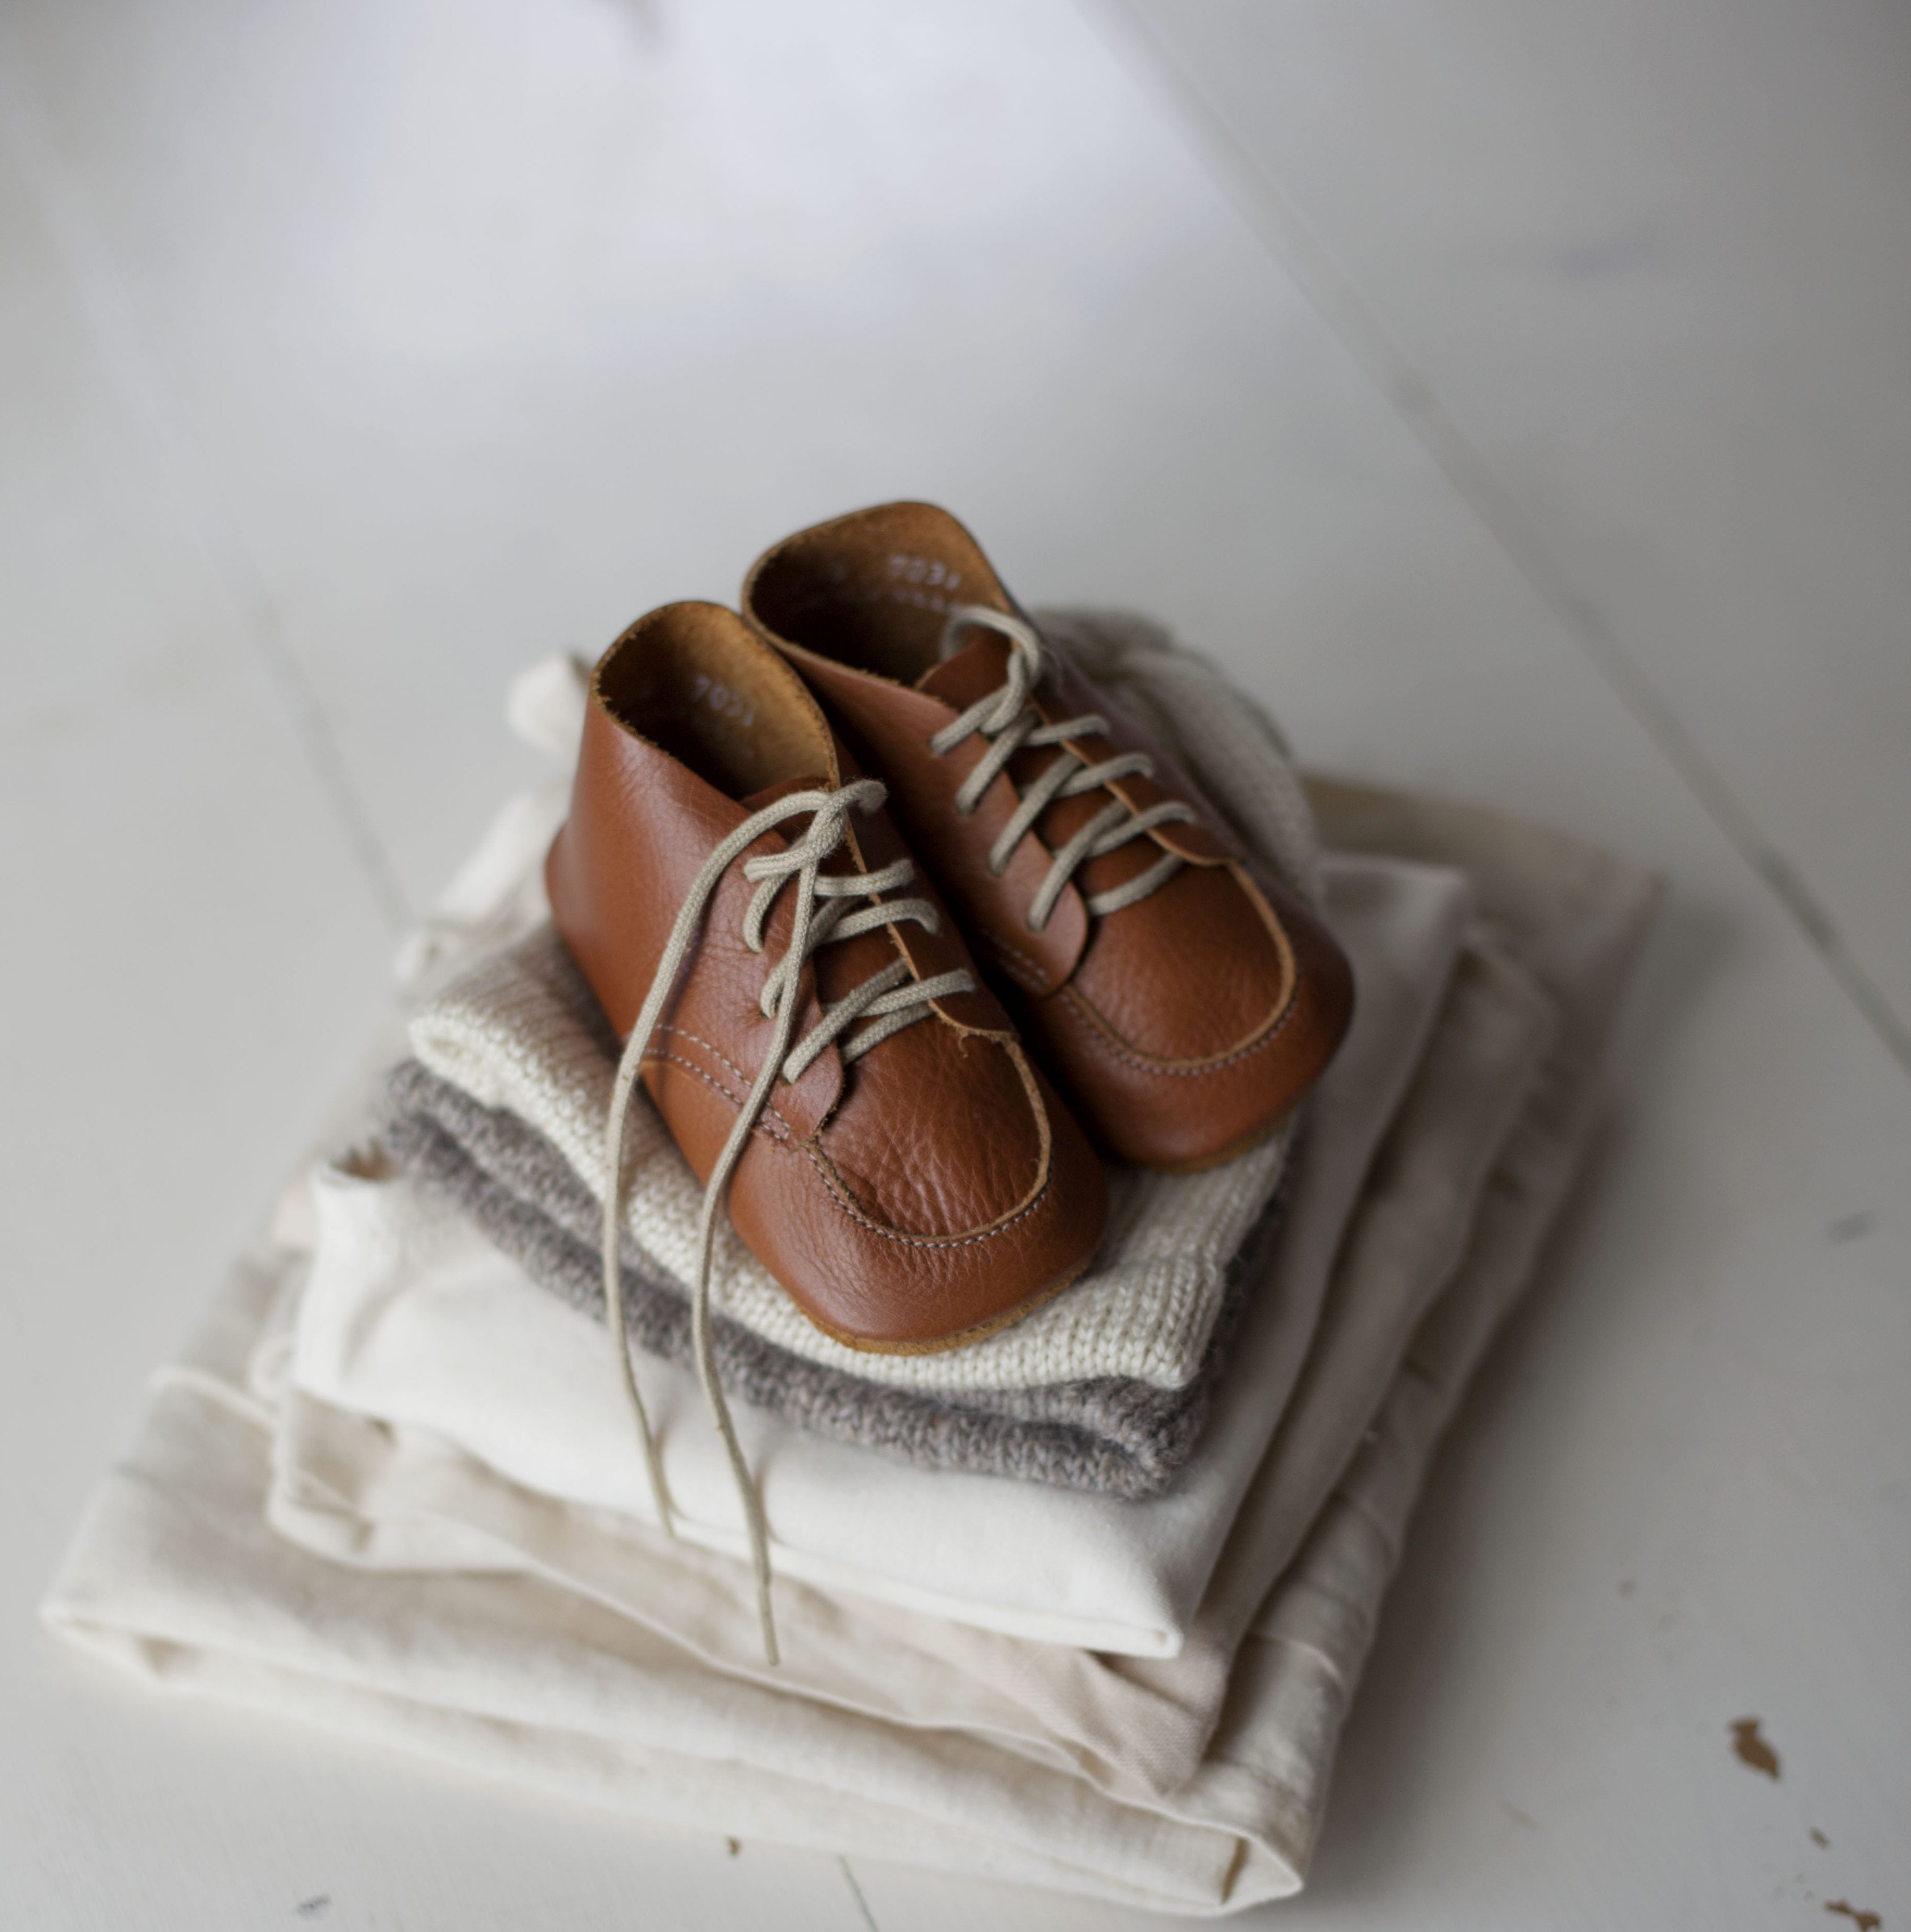 Natural Leather Soft-soled Shoe - Tortoise & the Hare Clothing